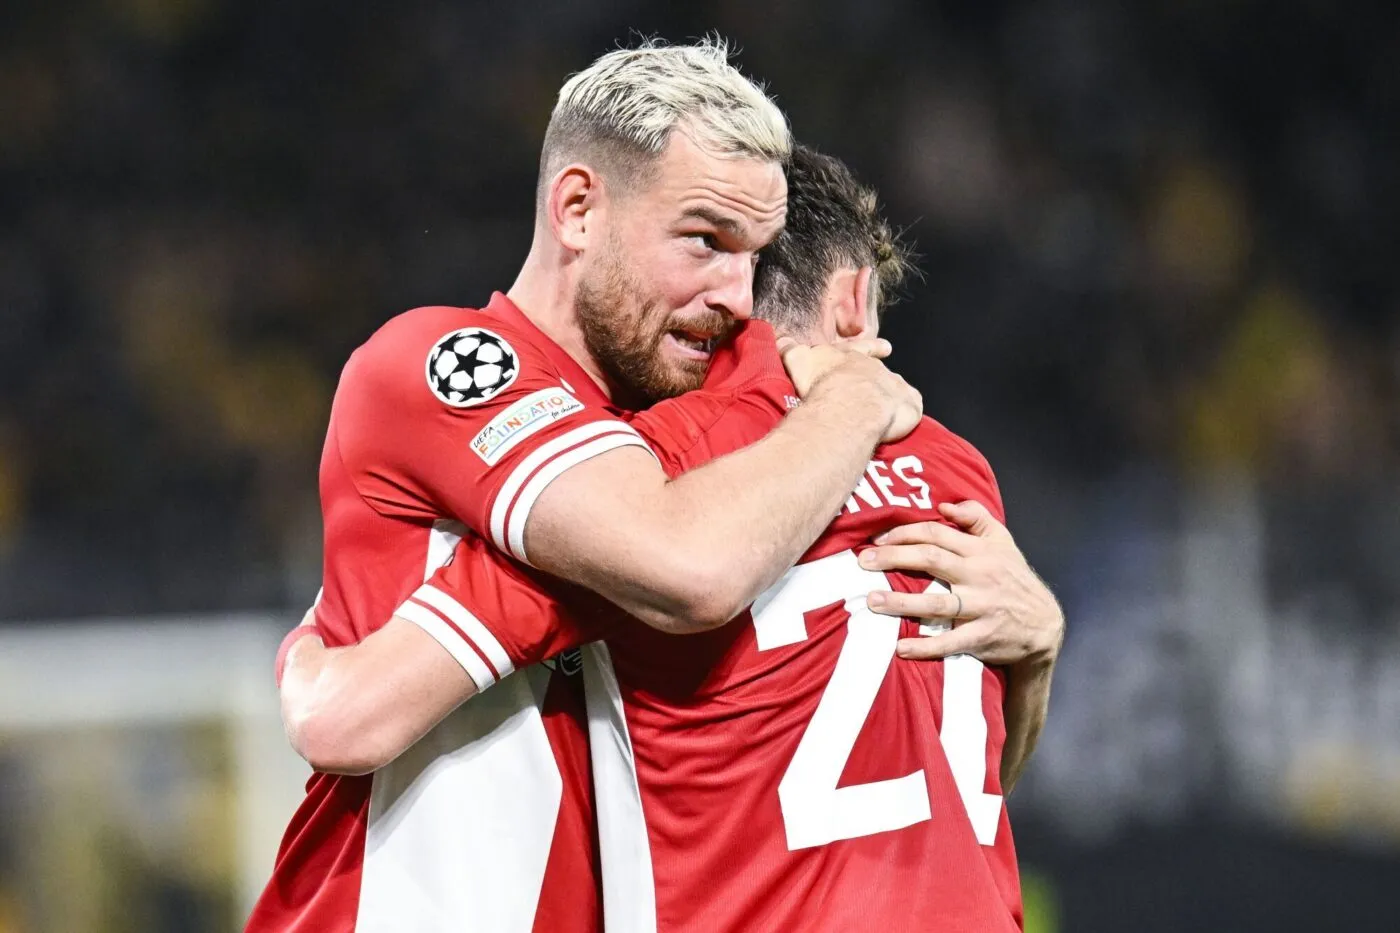 Antwerp's Vincent Janssen, Antwerp's Sam Vines and celebrate after winning a soccer game between Greek AEK Athens FC and Belgian soccer team Royal Antwerp FC, Wednesday 30 August 2023 in Athens, Greece, the return leg of the play-offs for the UEFA Champions League competition. BELGA PHOTO TOM GOYVAERTS - Photo by Icon sport